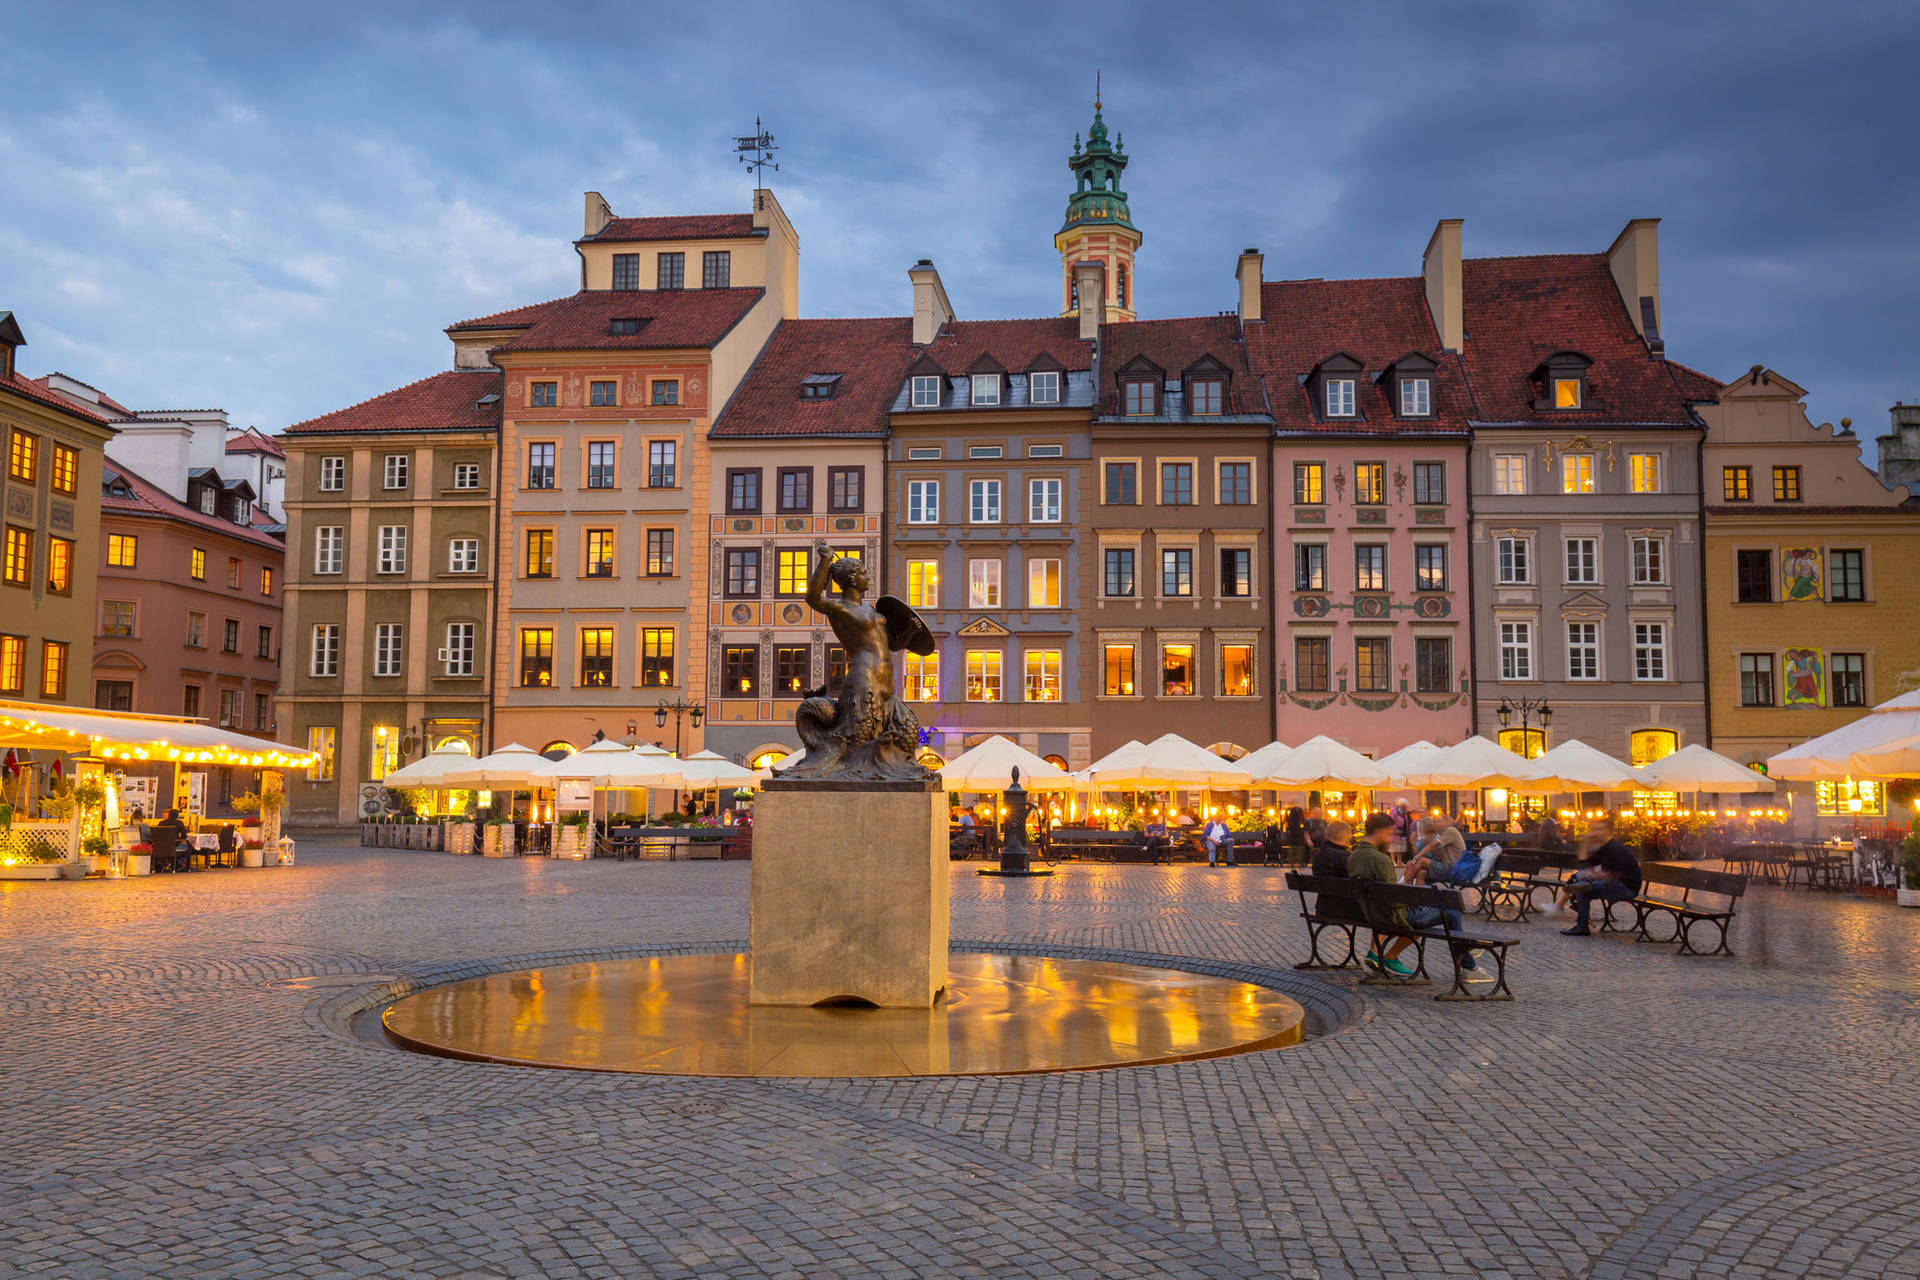 Enchanting Night View Of Poland's Old Town Background